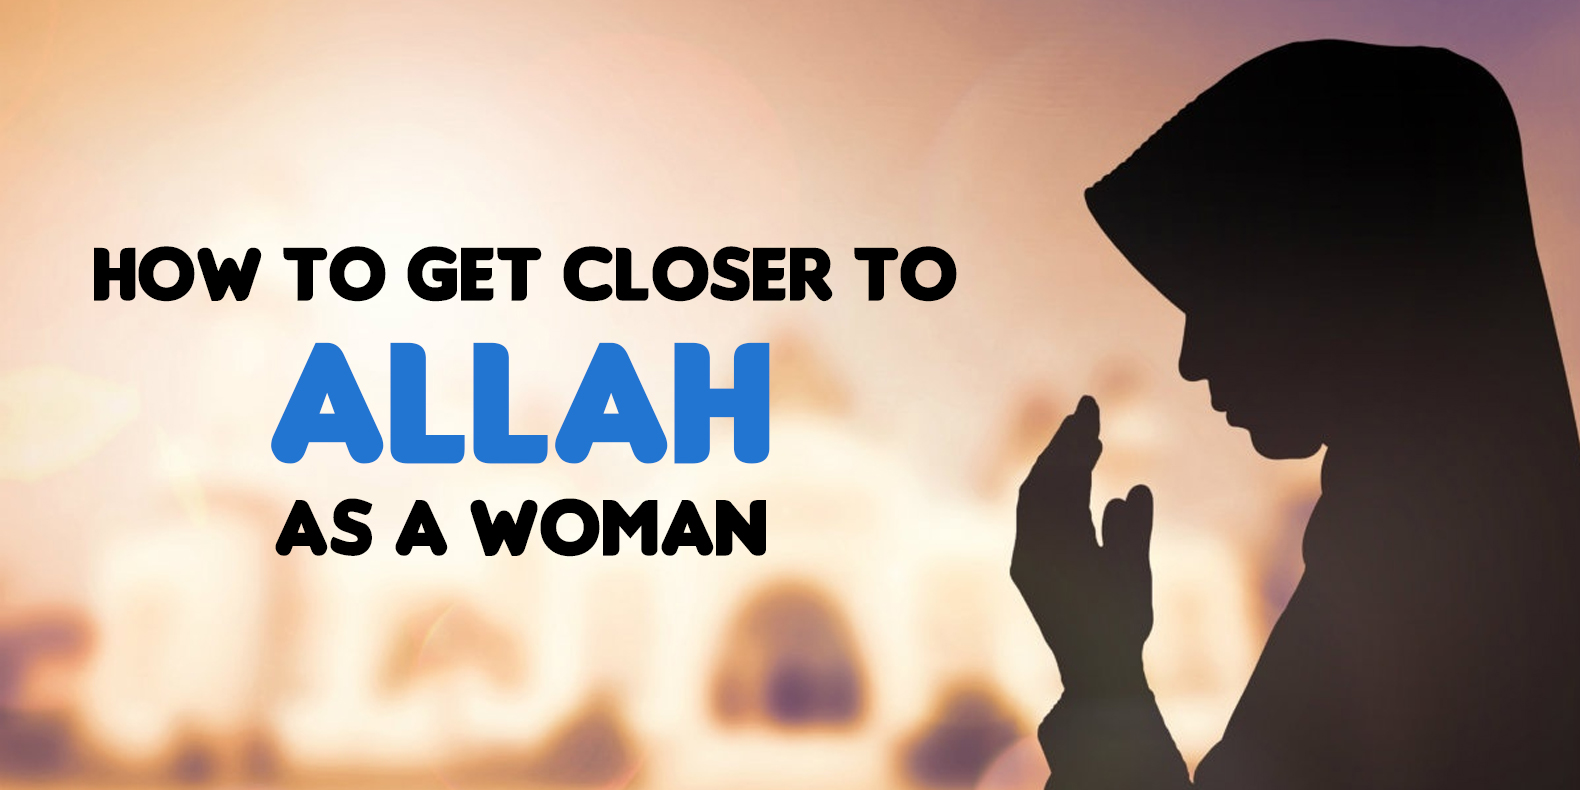 How to get closer to Allah as a woman